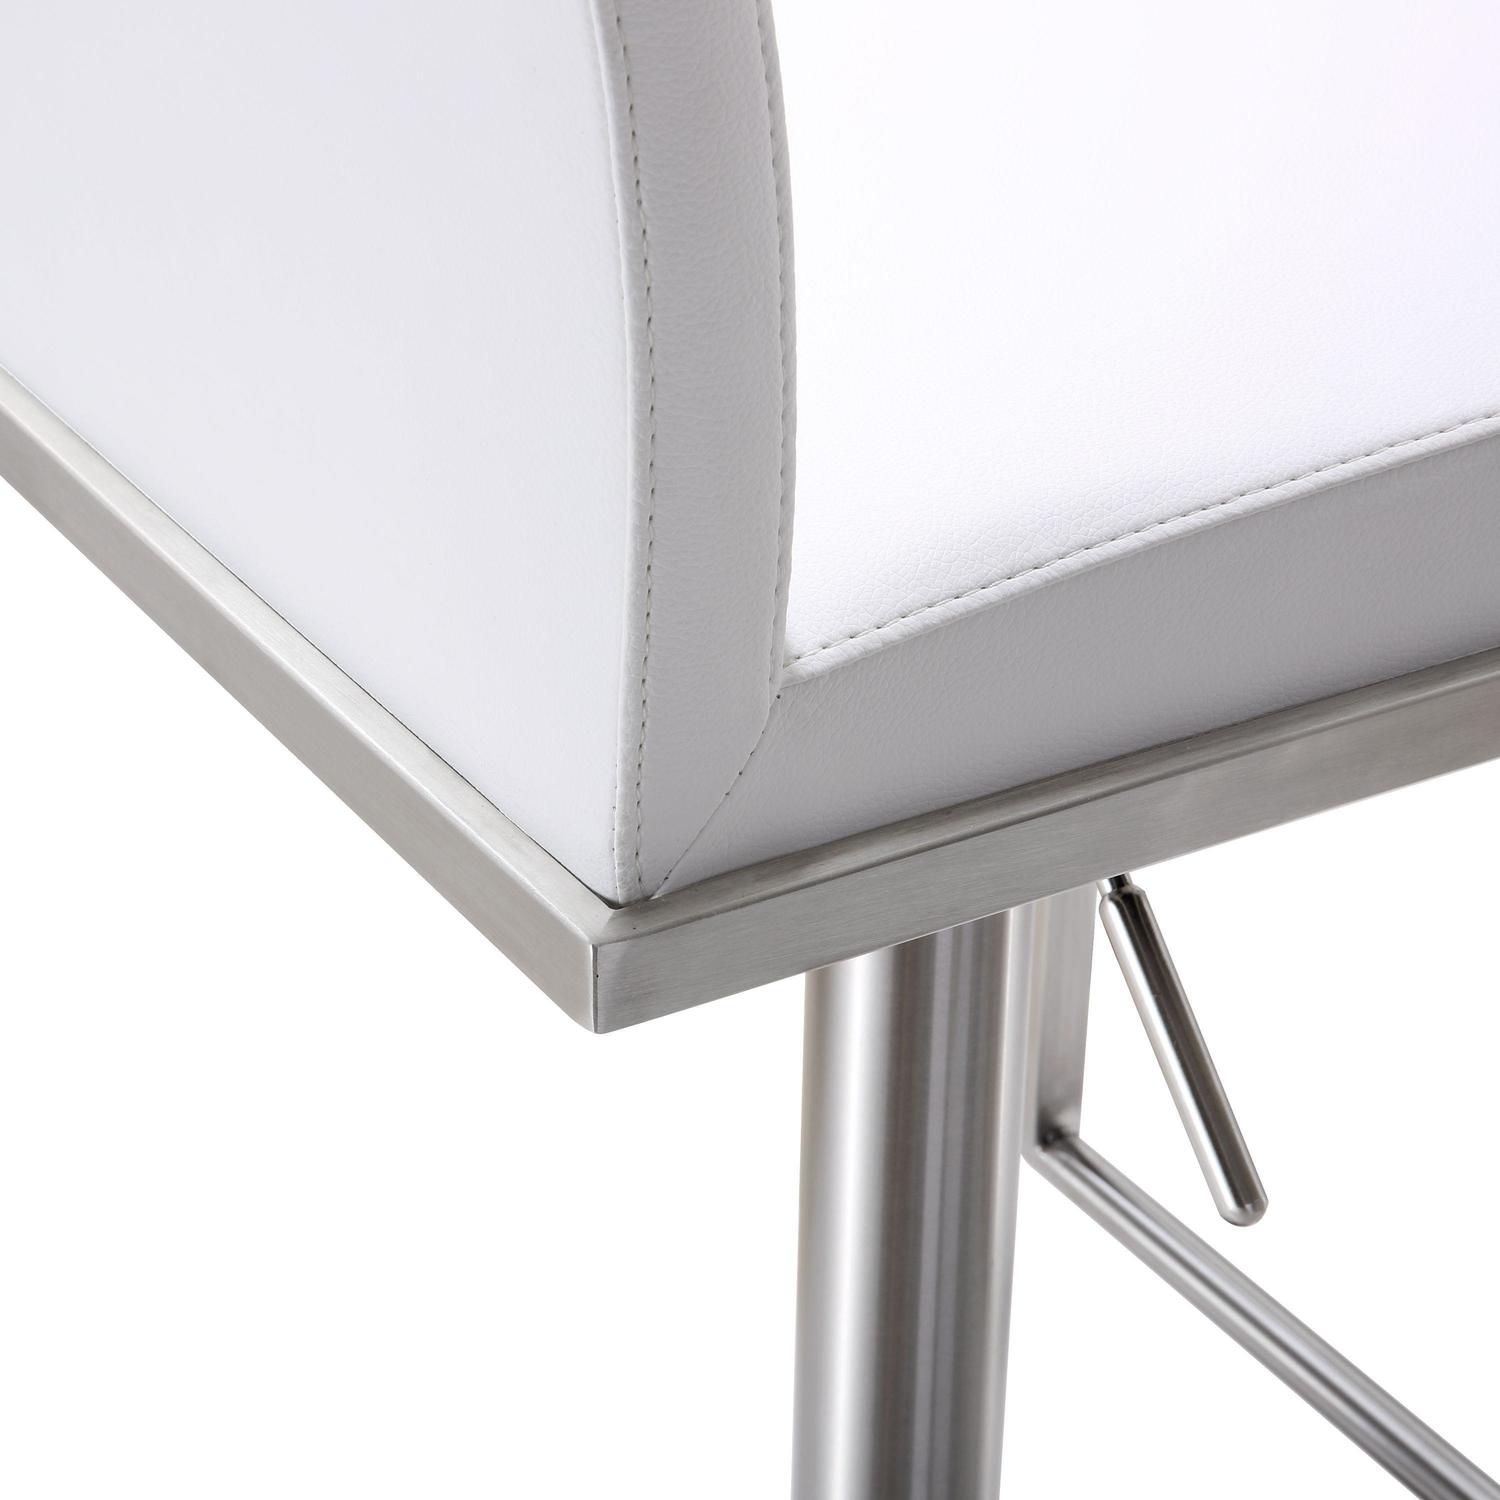 gray counter height bar stools Tov Furniture Stools White